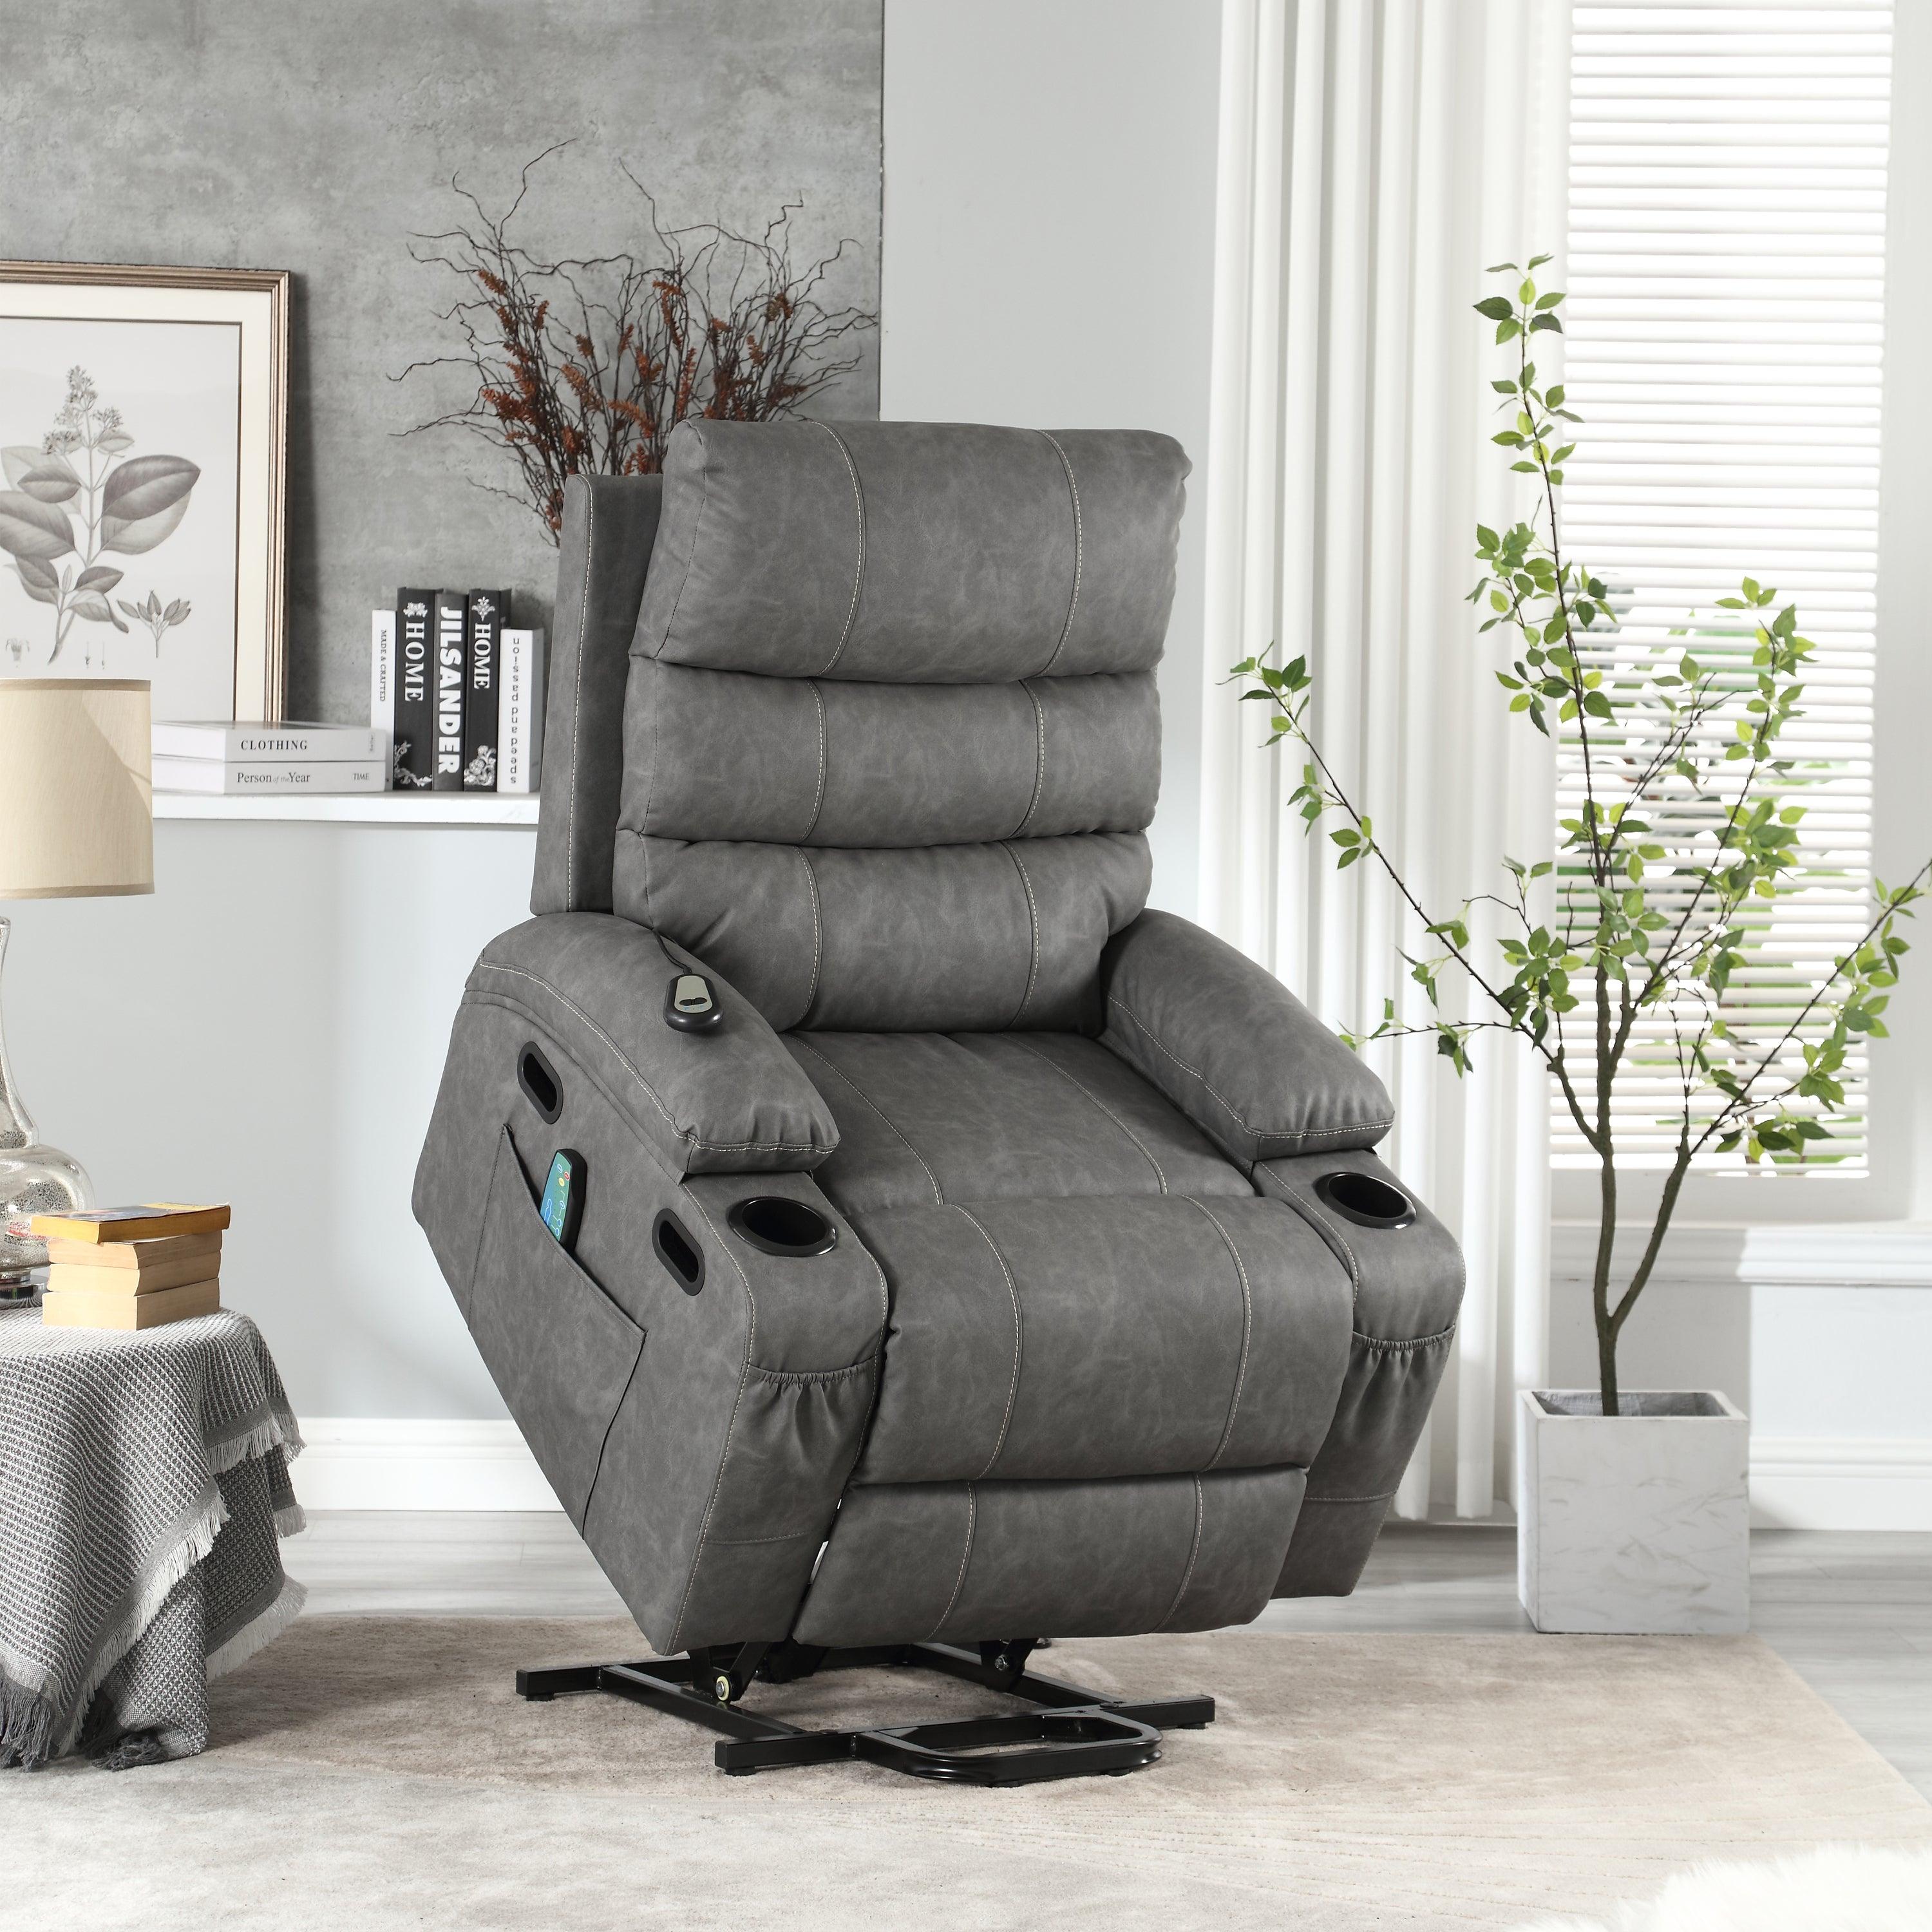 🆓🚛 21" Seat Width Electric Power Lift Recliner Chair Sofa for Elderly, 8 Point Vibration Massage & Lumber Heat, Remote Control, Side Pockets & Cup Holders, Gray